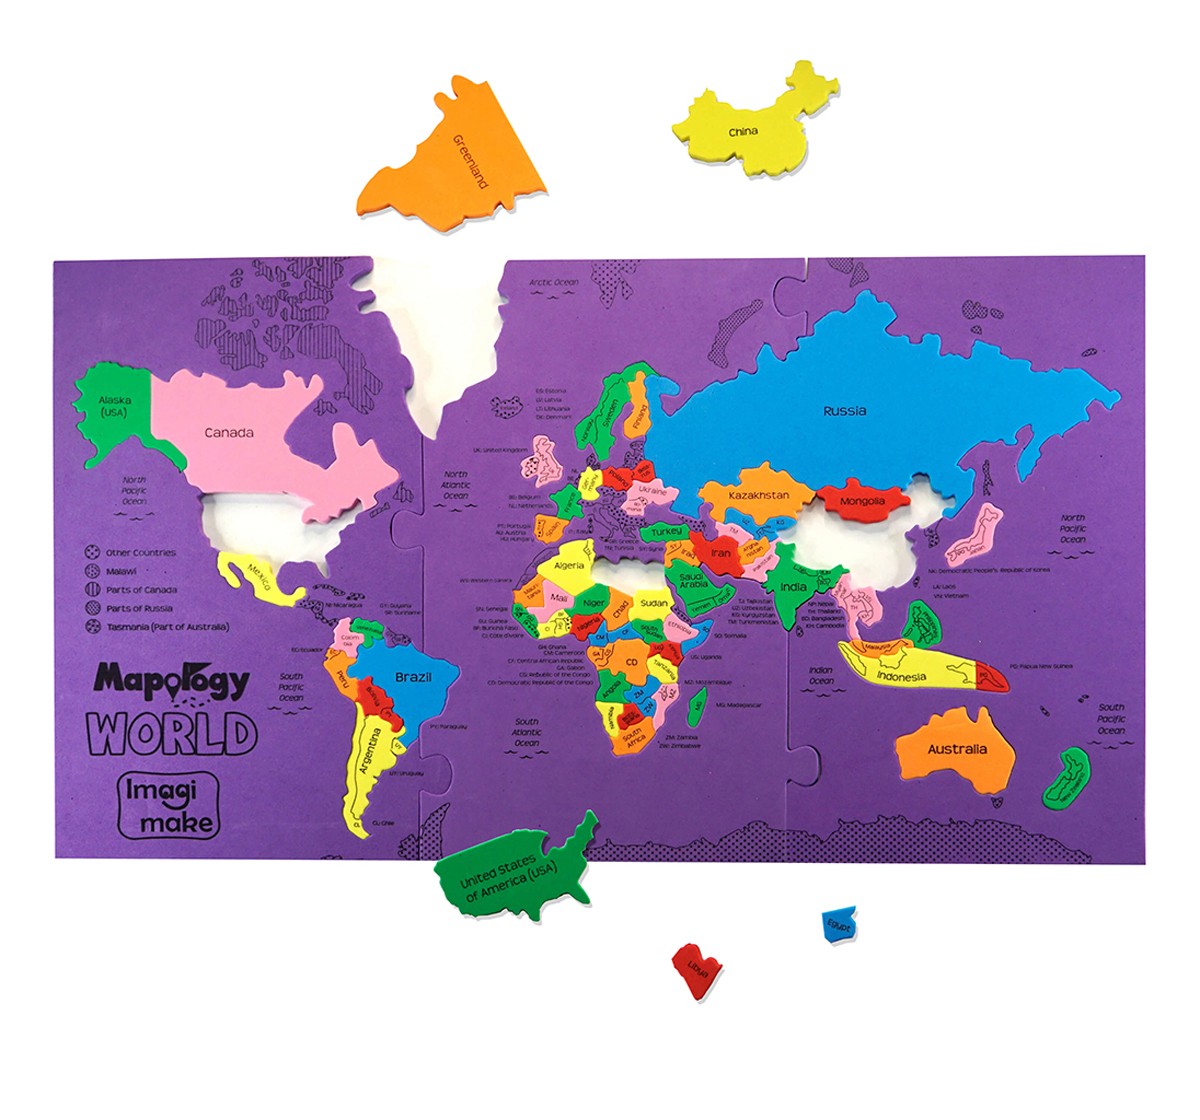 Imagimake Mapology Worlds Largest Countires for Kids, 5Y+(Multicolor)